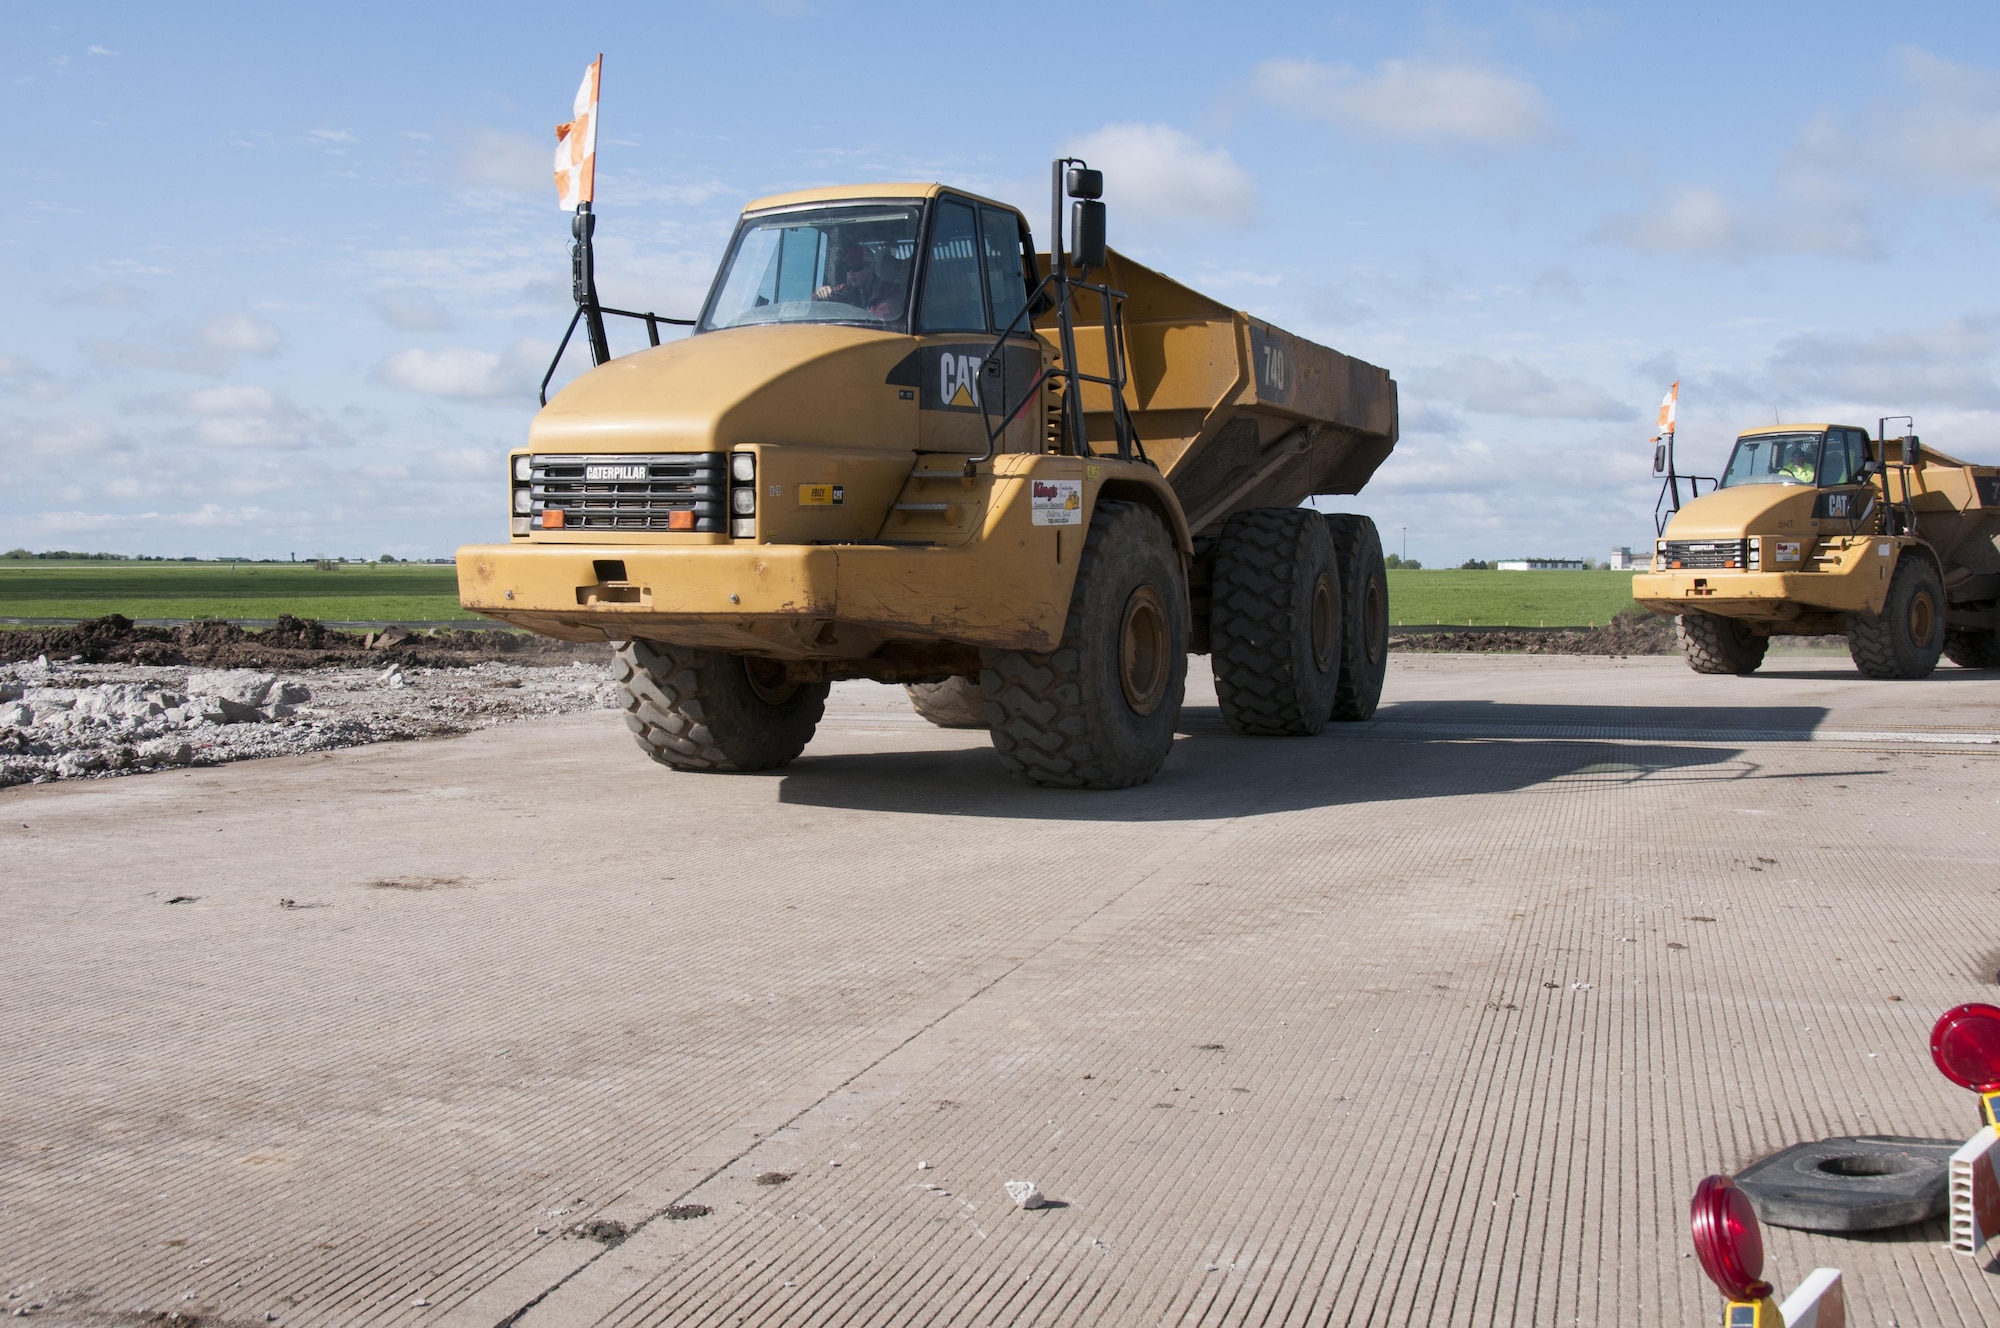 Construction vehicles move concrete away from the demolition zone on the northwest half of the runway at Forbes Field Air National Guard Base, Topeka, Kan. April 20, 2017. Since February 2017, Forbes Field and local contractors have been performing a major construction overhaul on the runway to improve flight operations and ensure the safety of Airmen and aircraft alike. 